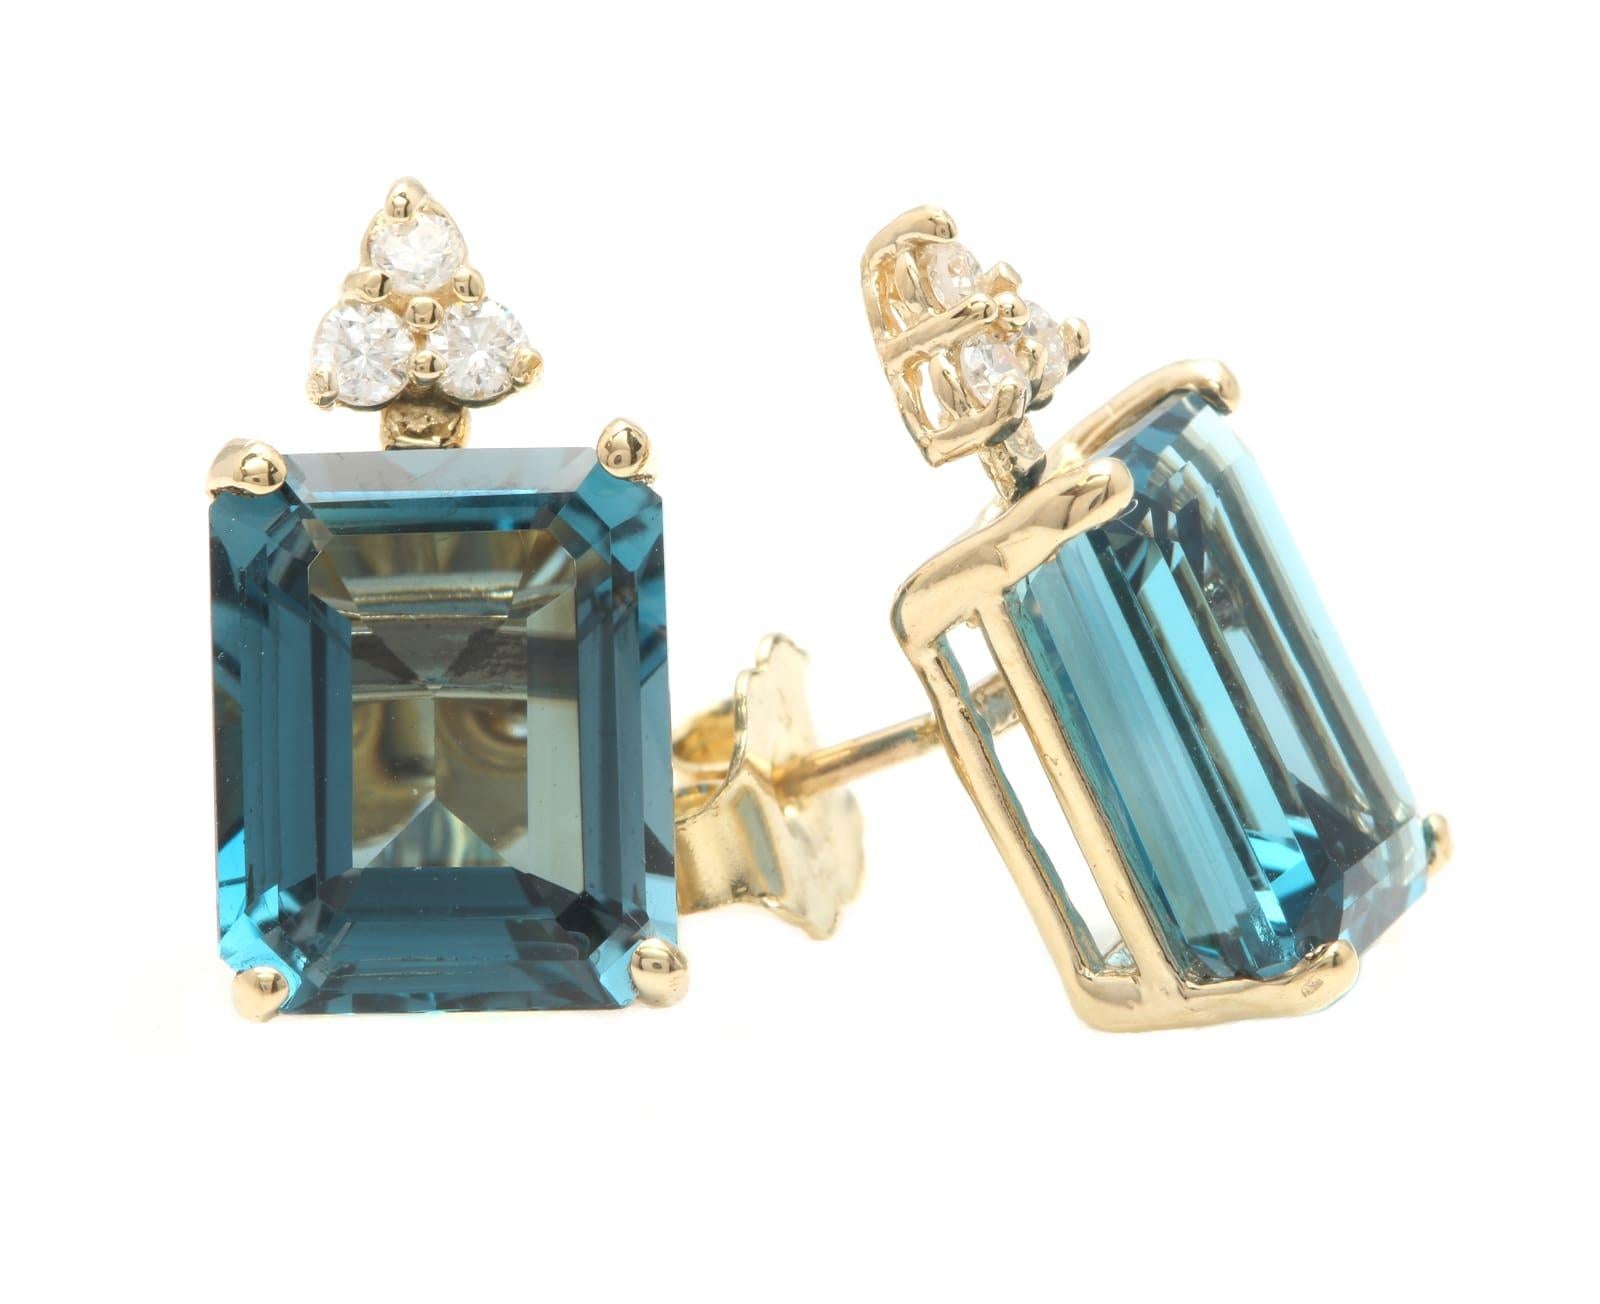 Exquisite 8.14 Carats Natural London Blue Topaz and Diamond 14K Solid Yellow Gold Stud Earrings

Amazing looking piece! 

Total Natural Round Cut White Diamonds Weight: 0.14 Carats (color G-H / Clarity SI1-SI2)

Total Natural Emerald Cut London Blue